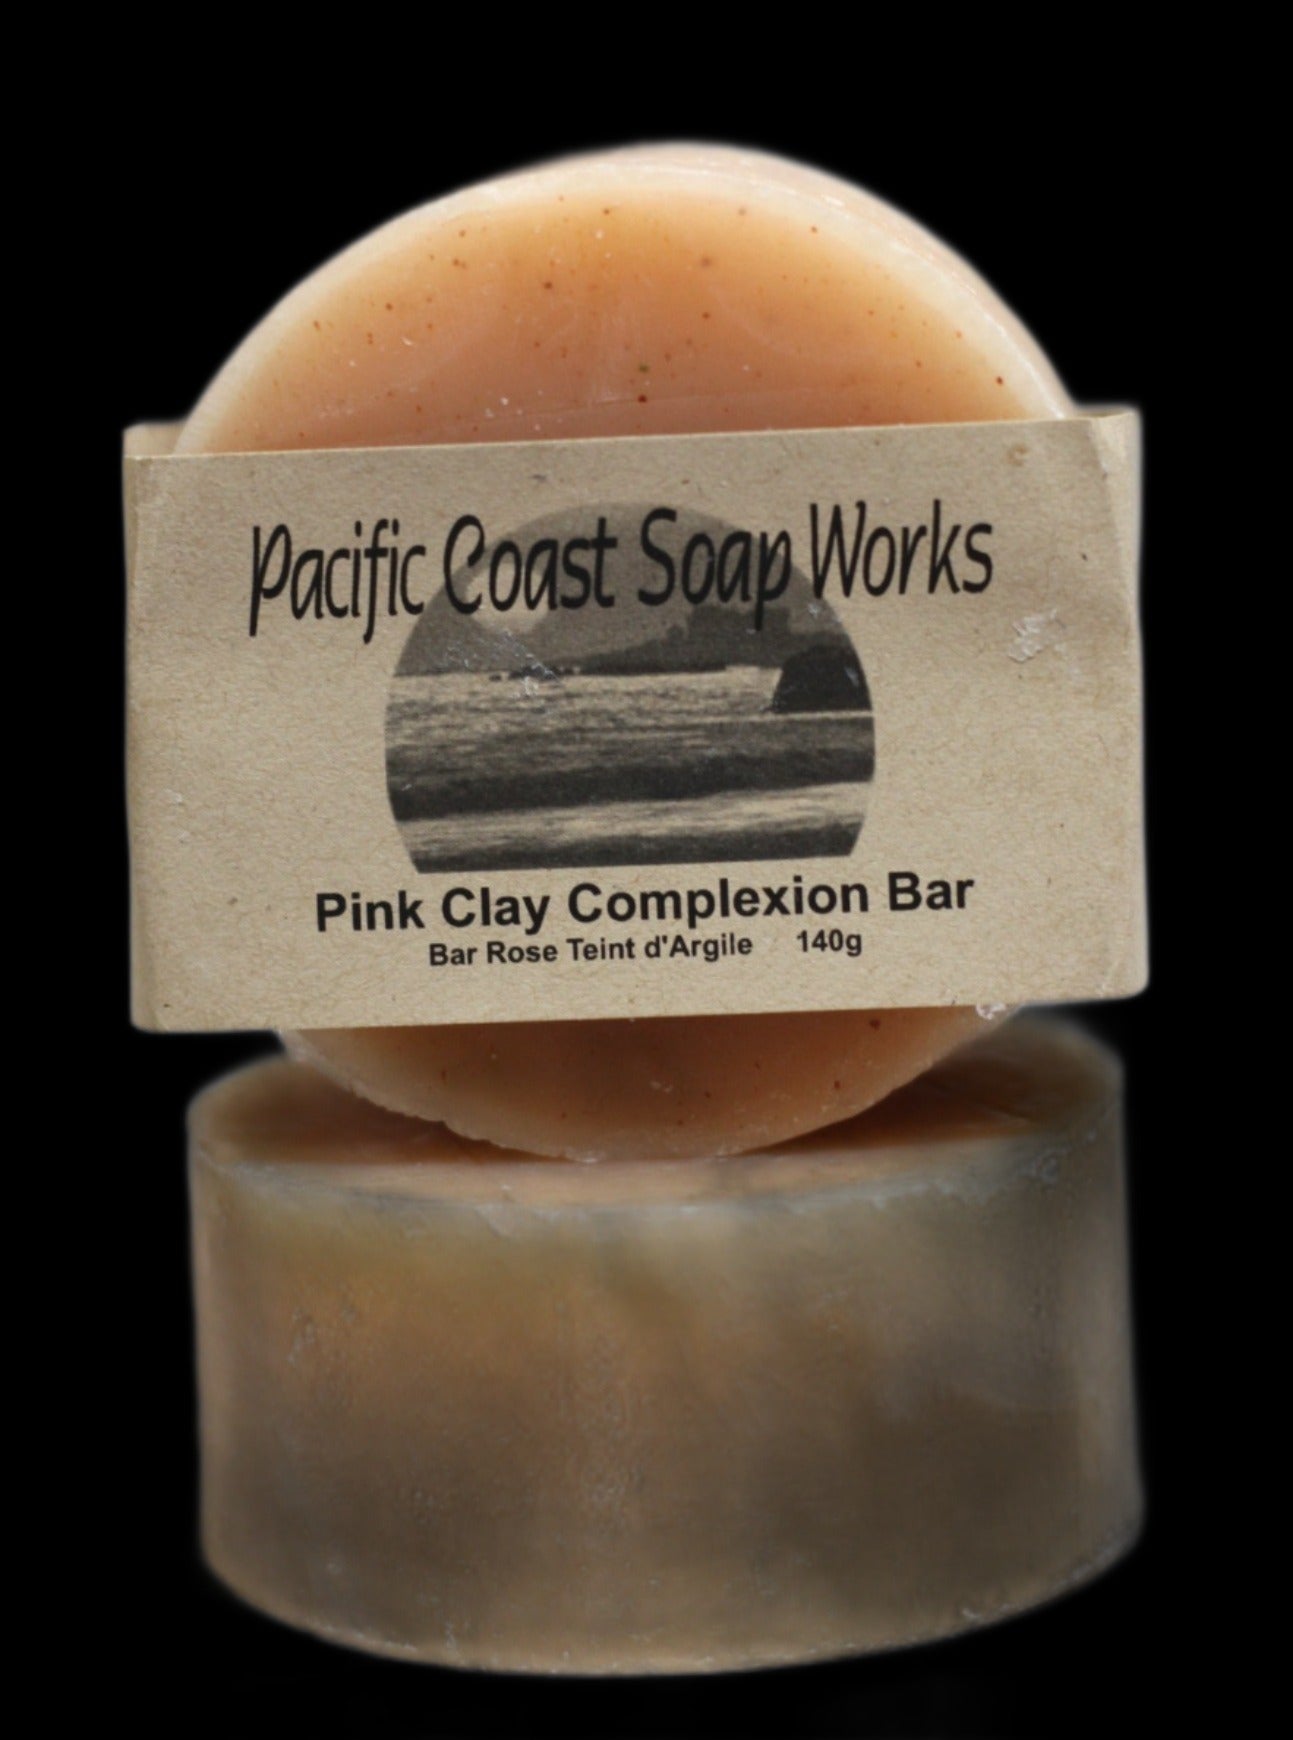 pink clay complexion bar. pink clay soap. soap works. handmade soap canada. natural soap companies. vancouver soap company.